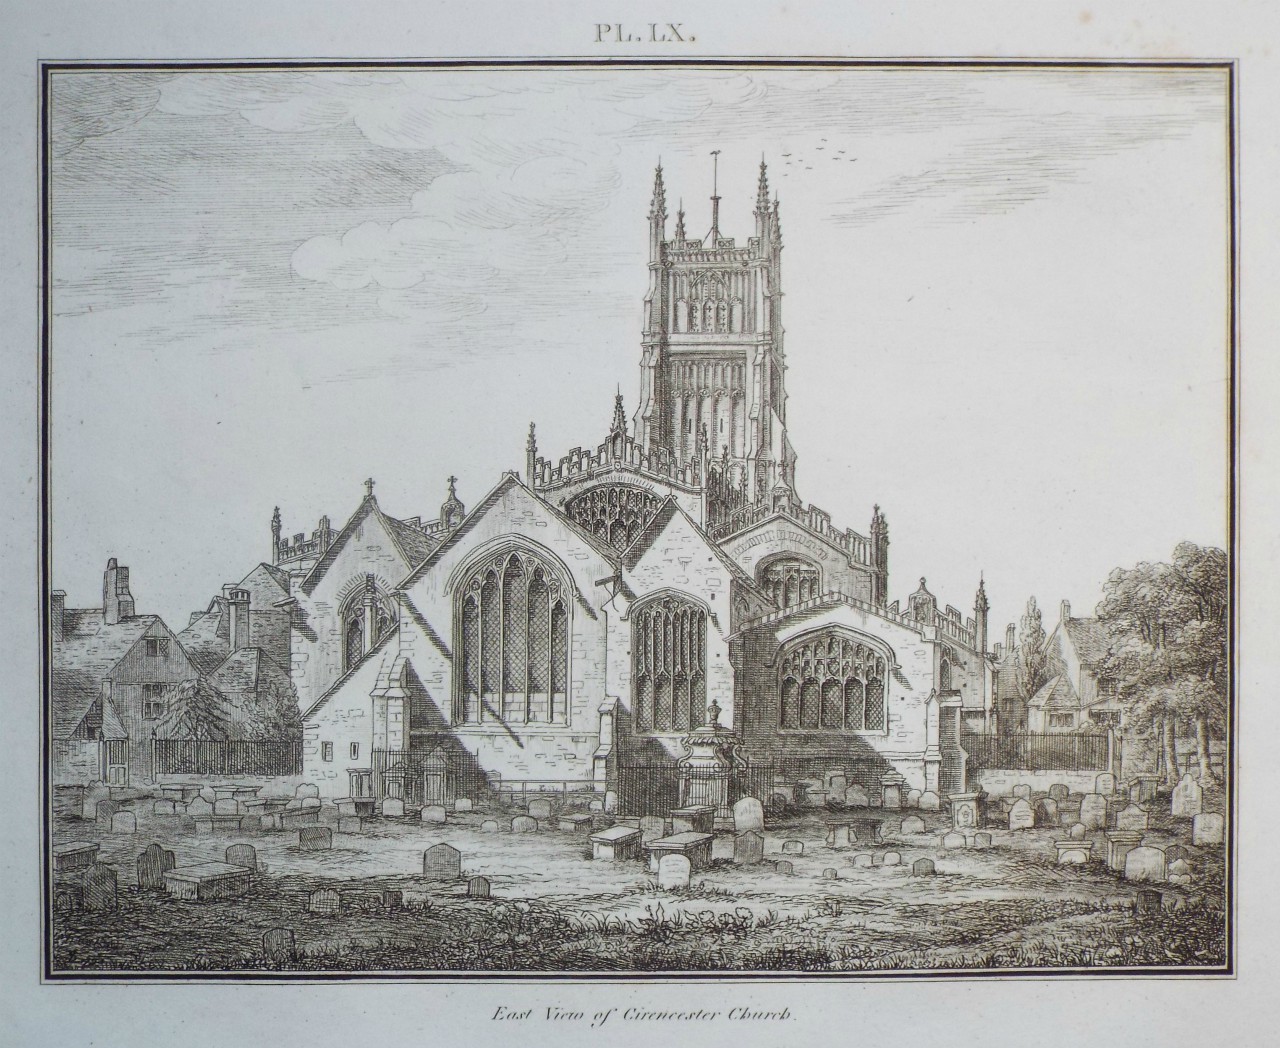 Etching - East View of Cirencester Church. - Lysons